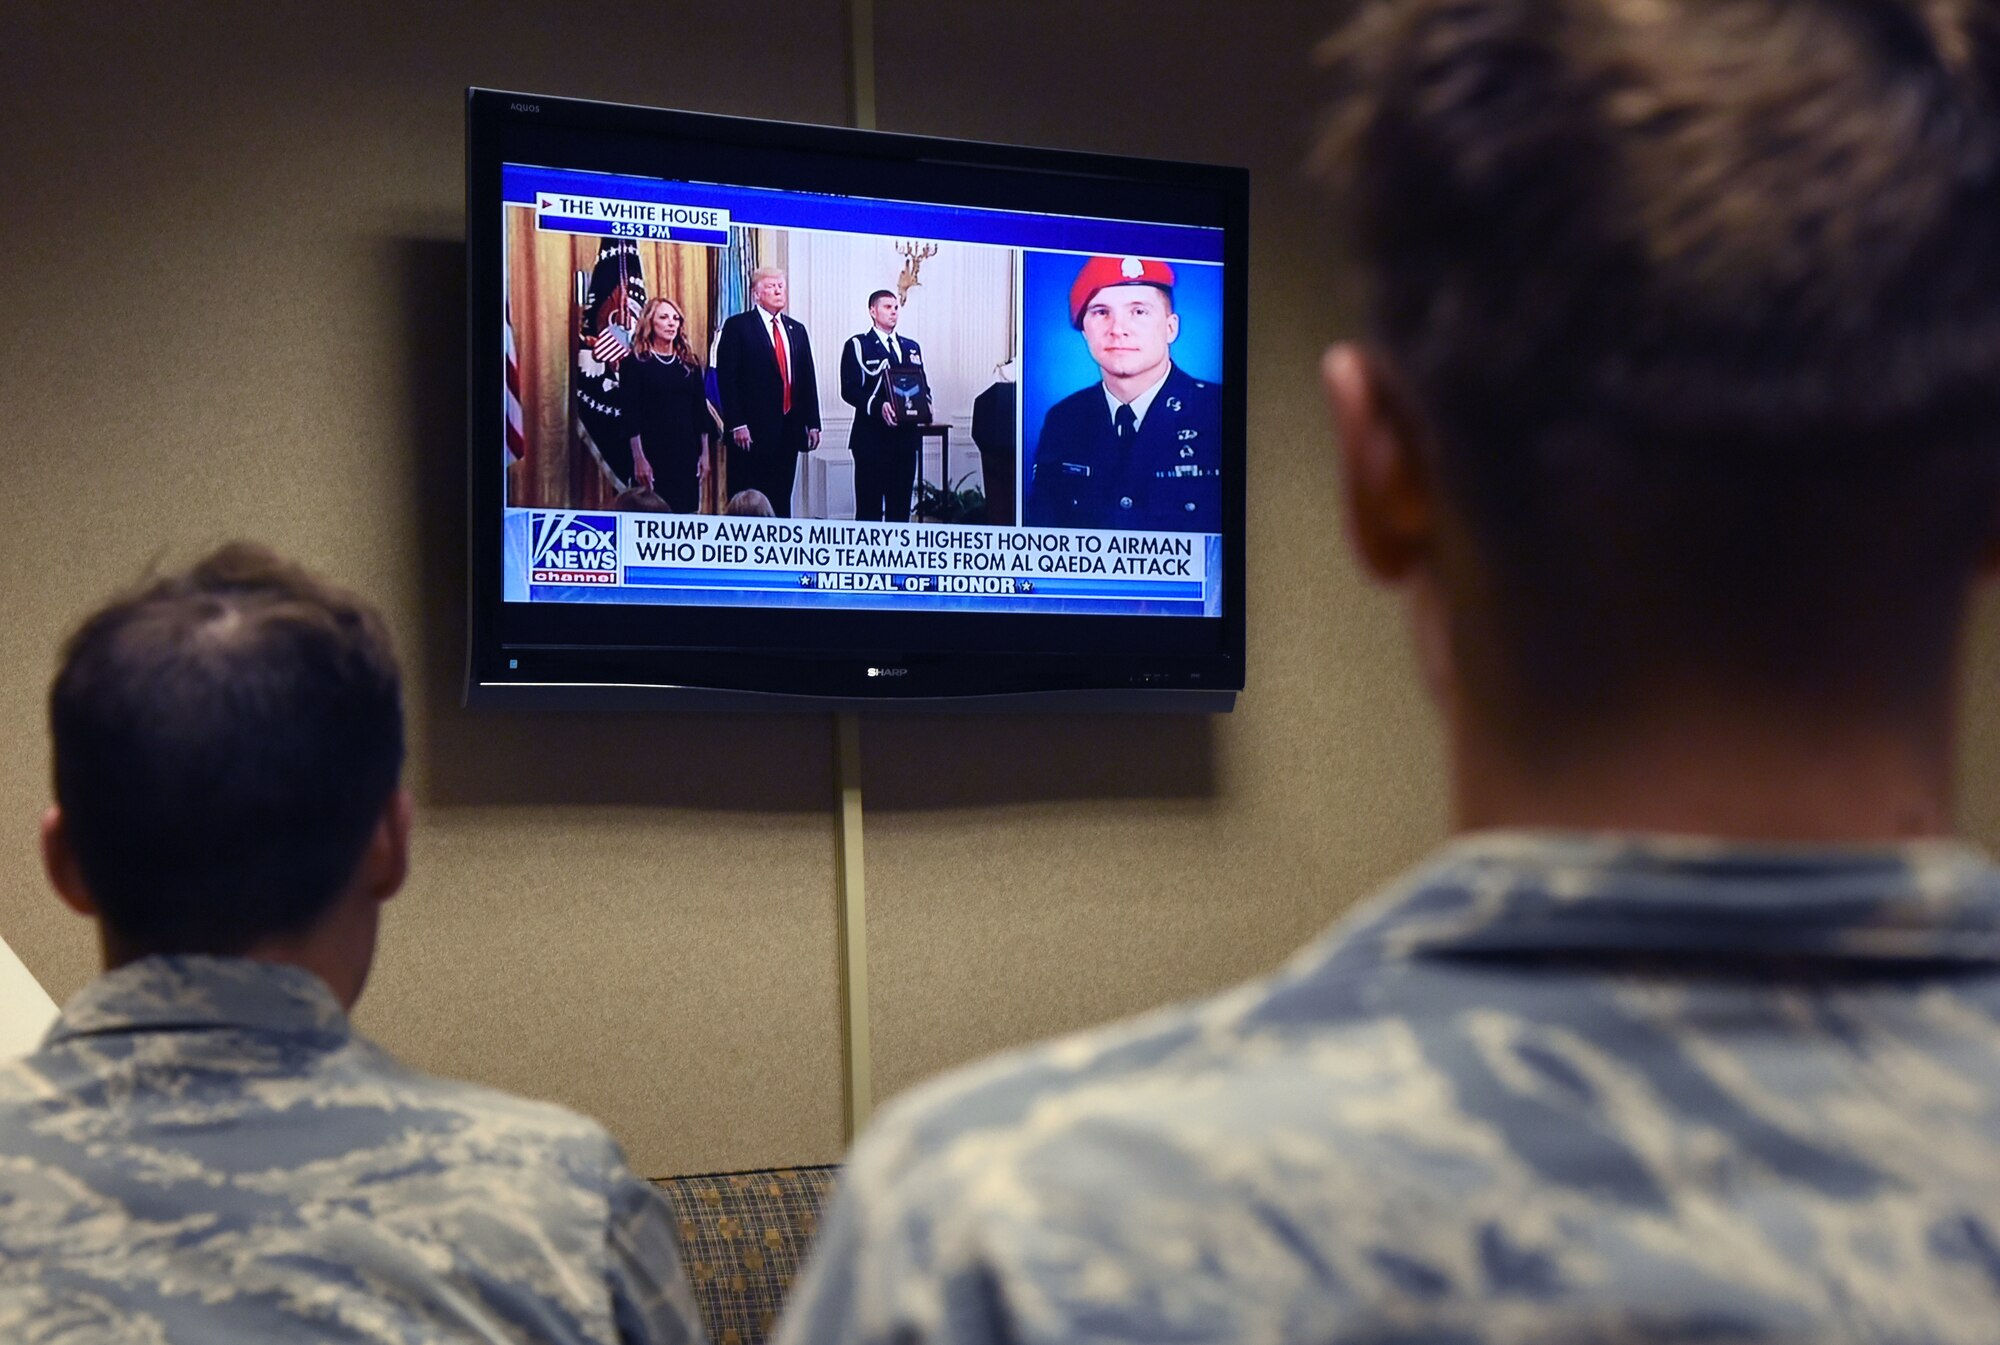 Airmen in the 334th Training Squadron watch a televised Medal of Honor presentation at Cody Hall at Keesler Air Force Base, Mississippi, Aug. 23, 2018. Tech. Sgt. John Chapman was posthumously awarded the Medal of Honor, the nation�s highest award for valor in combat, by U.S. President Donald Trump. Chapman was killed in Afghanistan on March 4, 2002. (U.S. Air Force photo by Kemberly Groue)